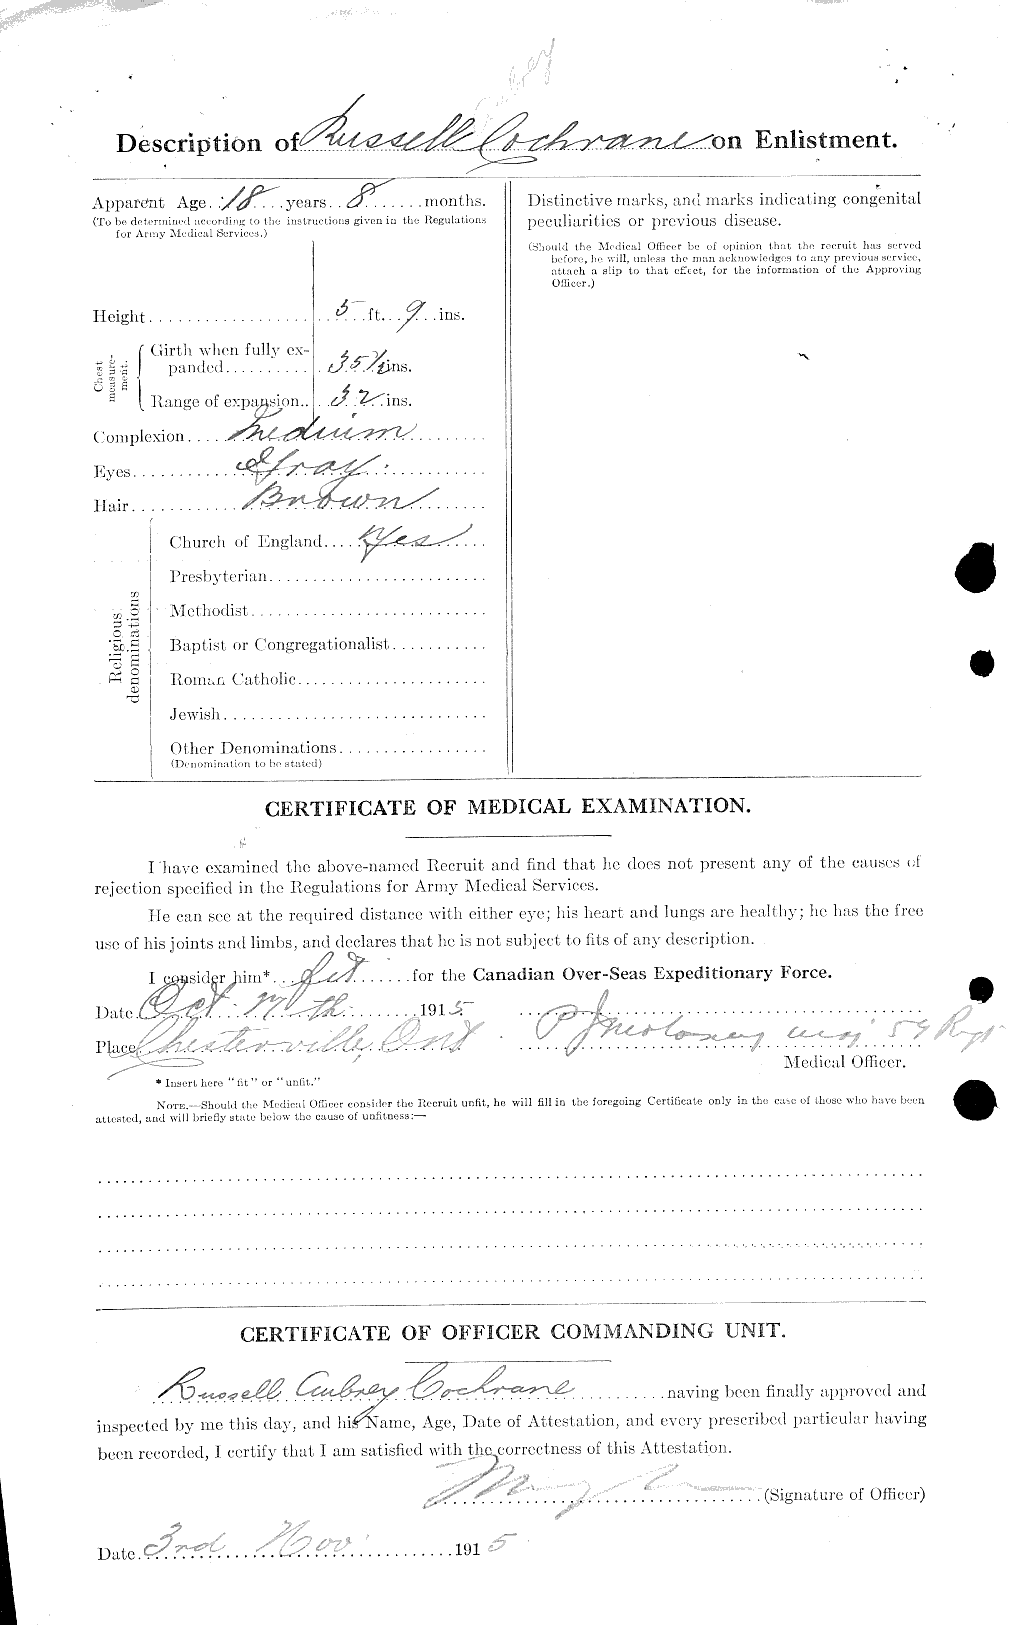 Personnel Records of the First World War - CEF 026462b